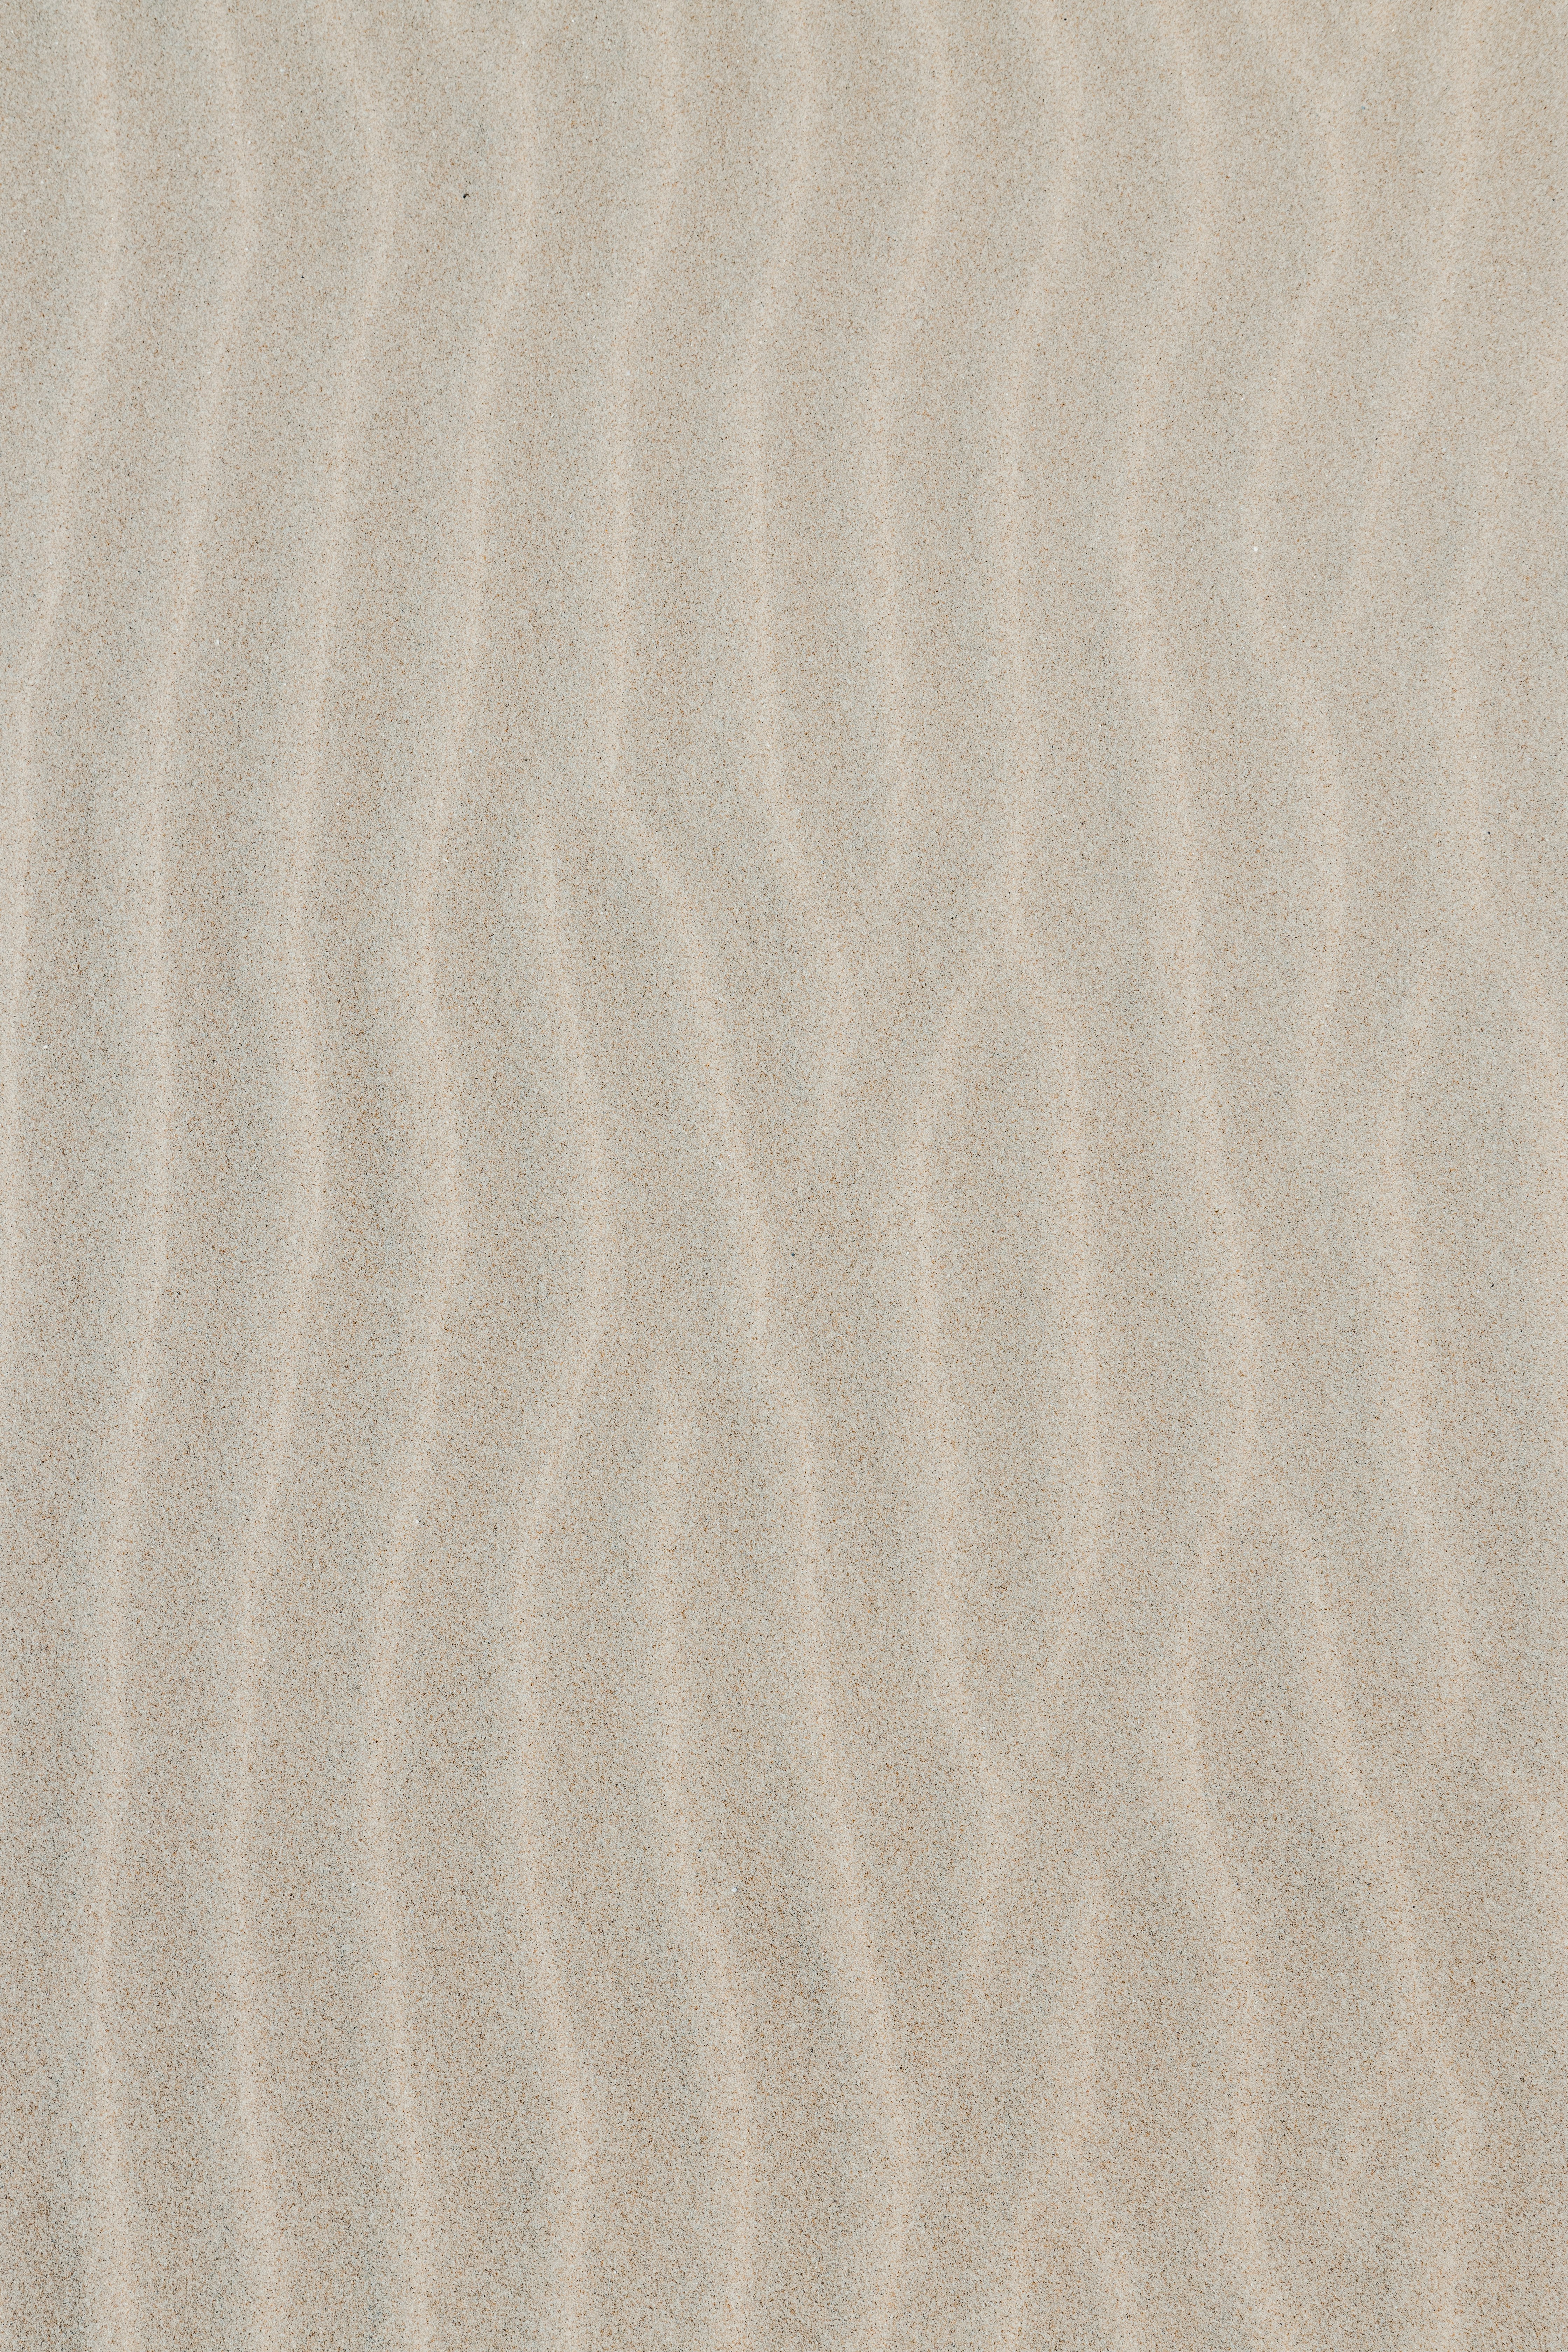 Top shot of some beach sand forming waves with pastel tones. Sand waves for texture background